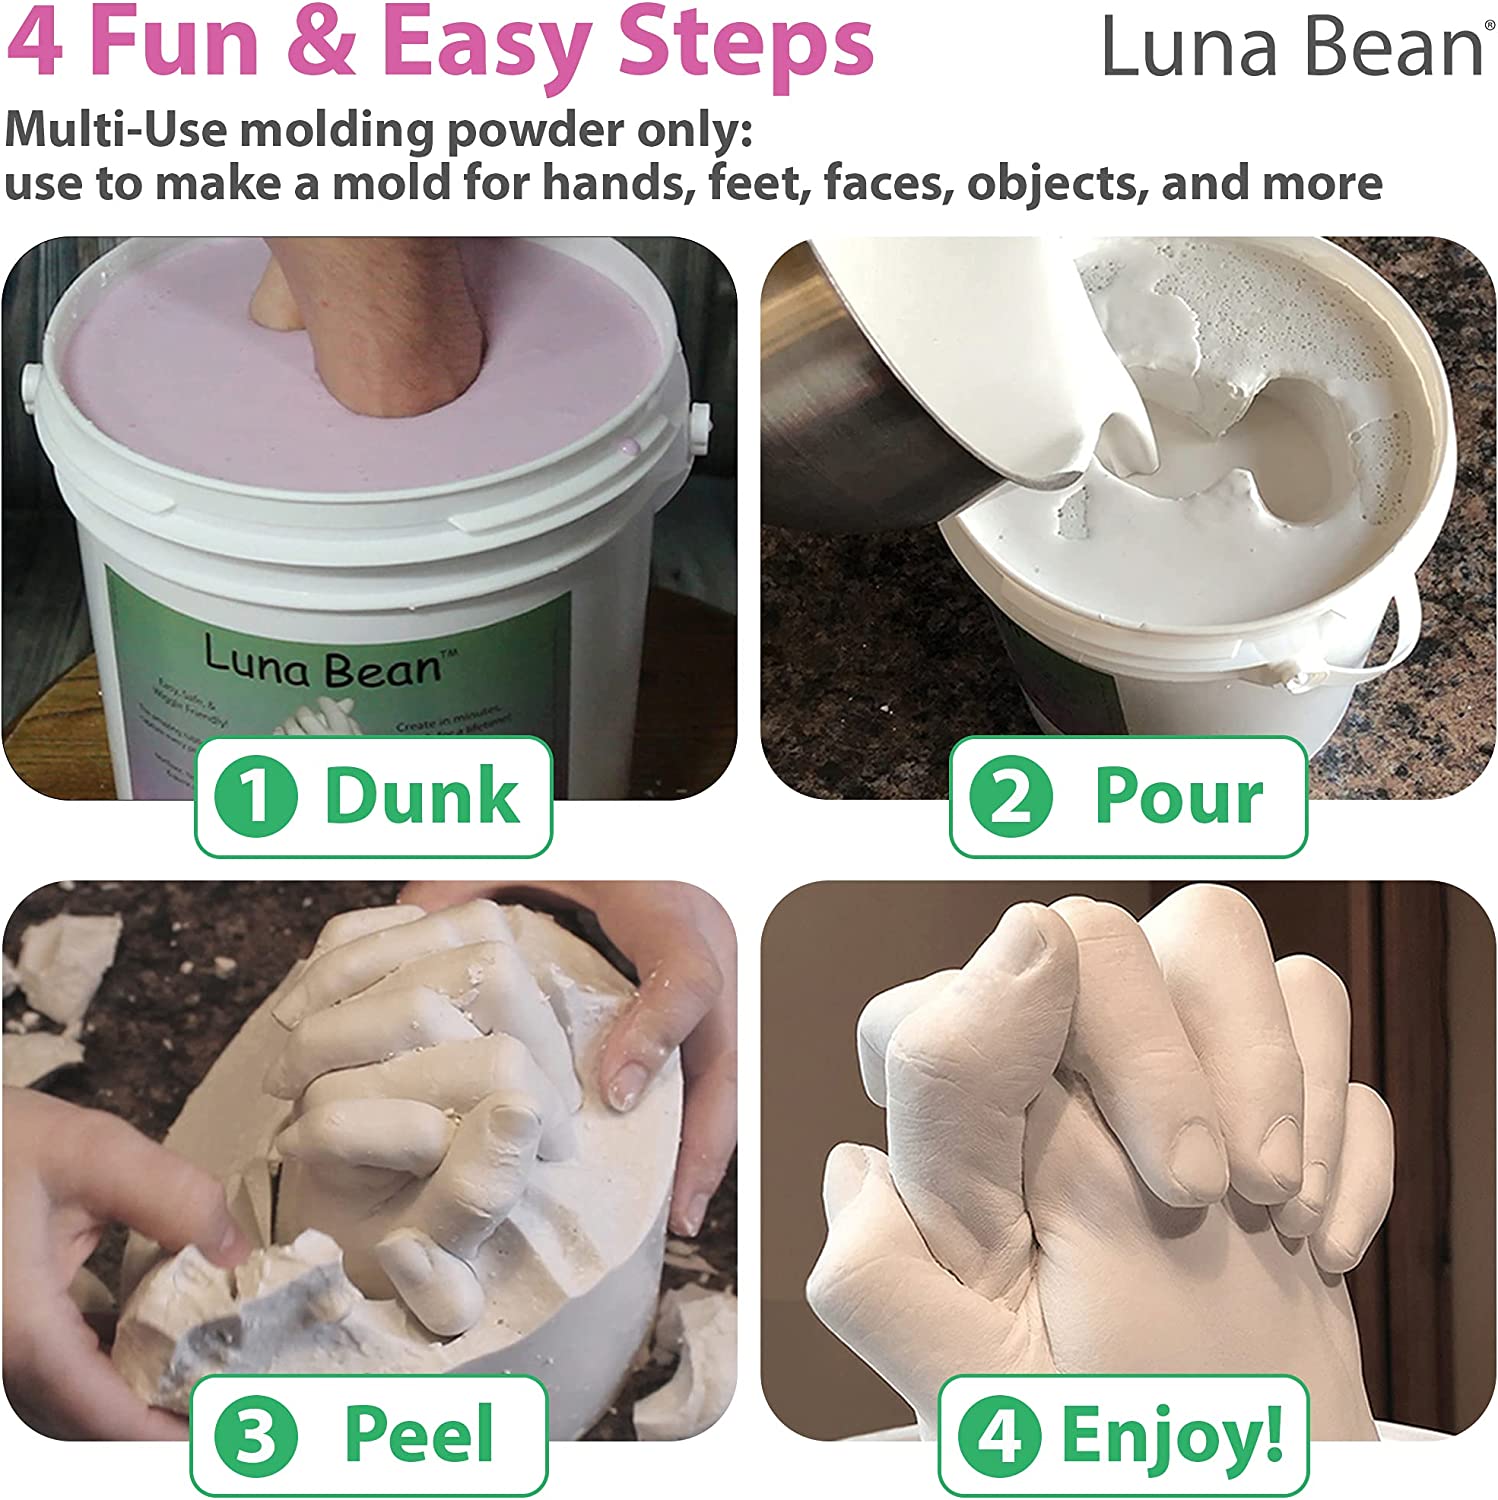 Alginate Molding Powder for Hand Casting Kit & Multi-Use Projects - 3 lb  Casting Plaster Material - Family Keepsakes- Create-a-Mold by Luna Bean